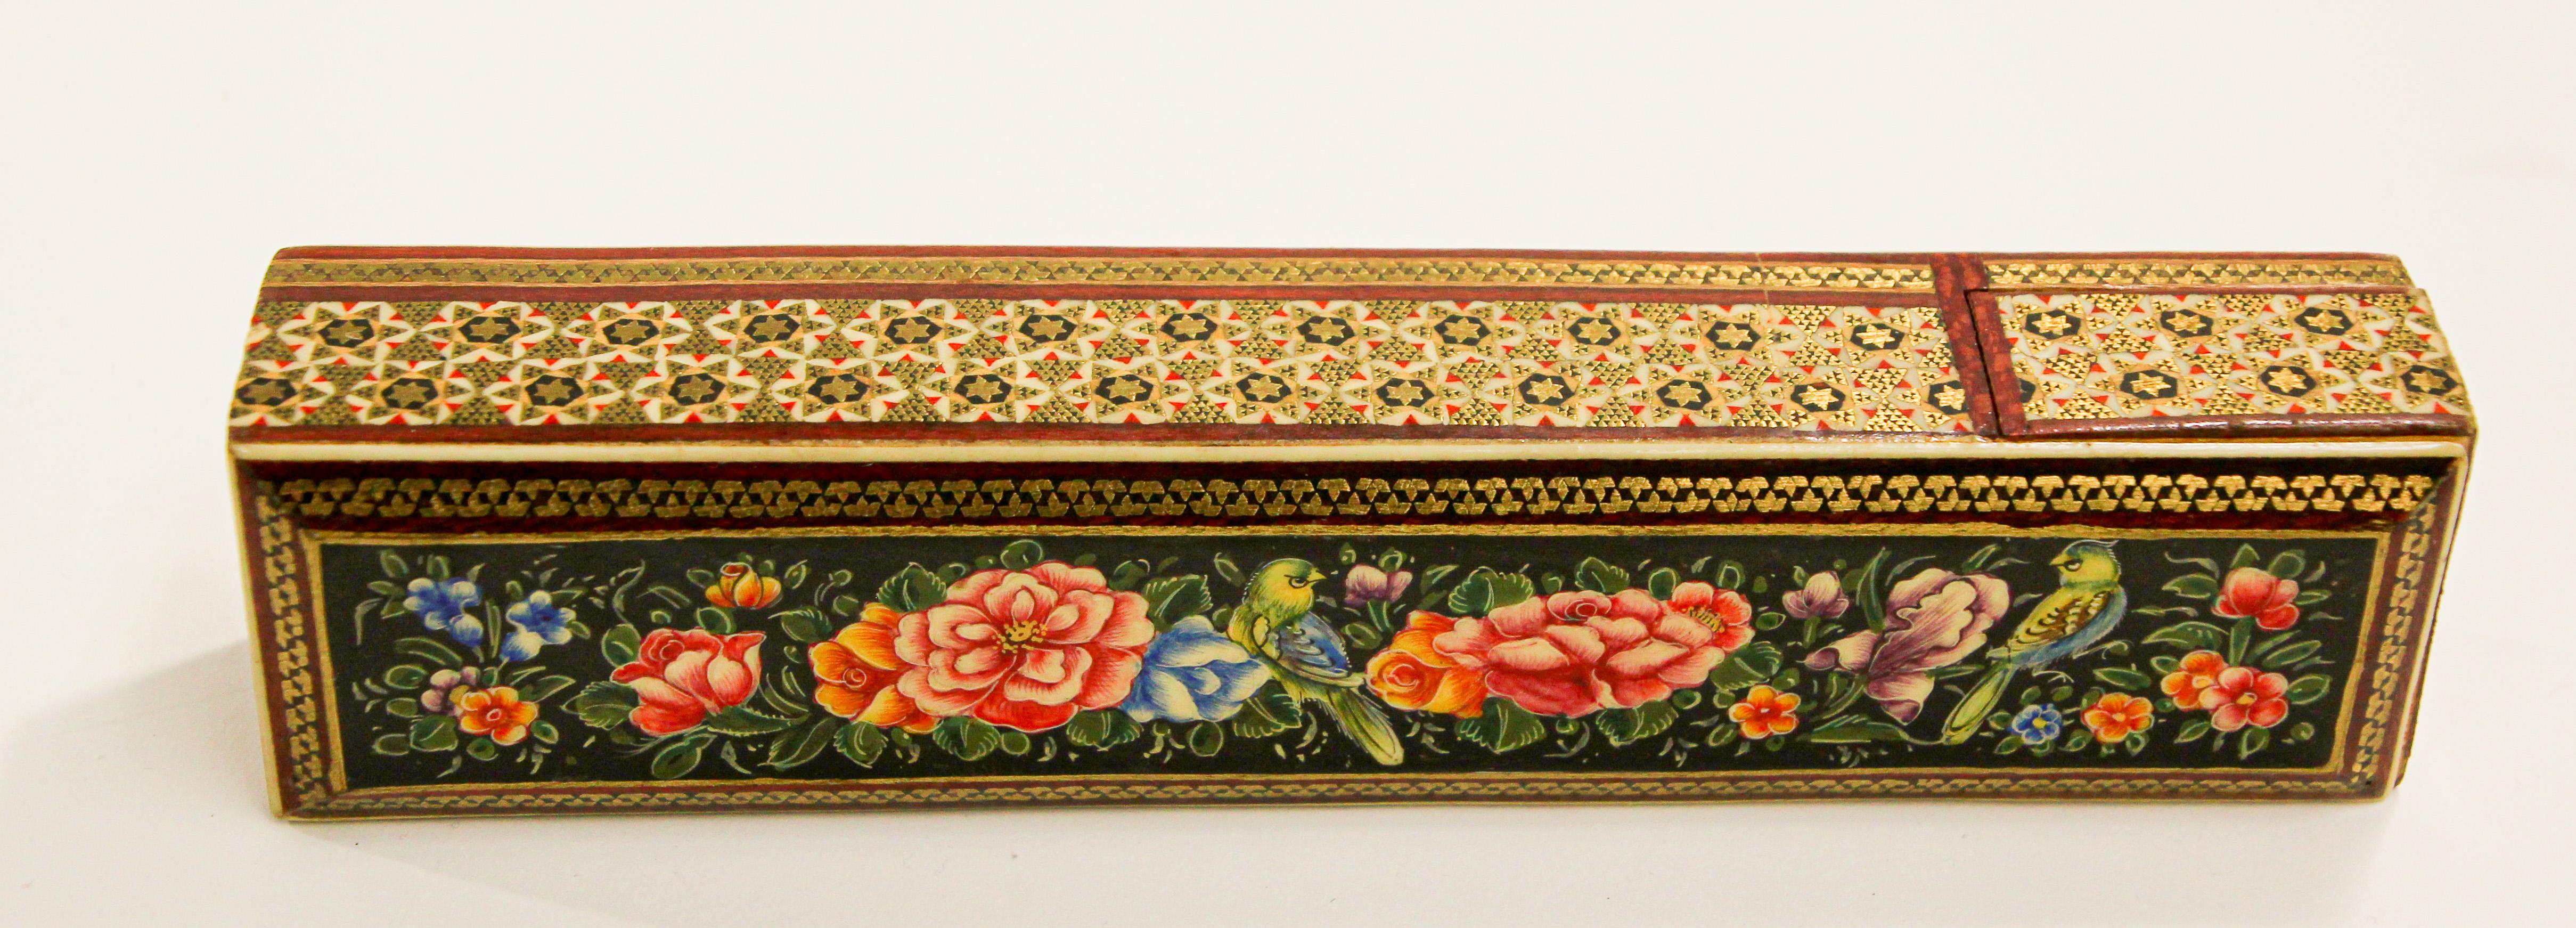 Moorish Persian Lacquer Pen Box Hand Painted with Floral Design For Sale